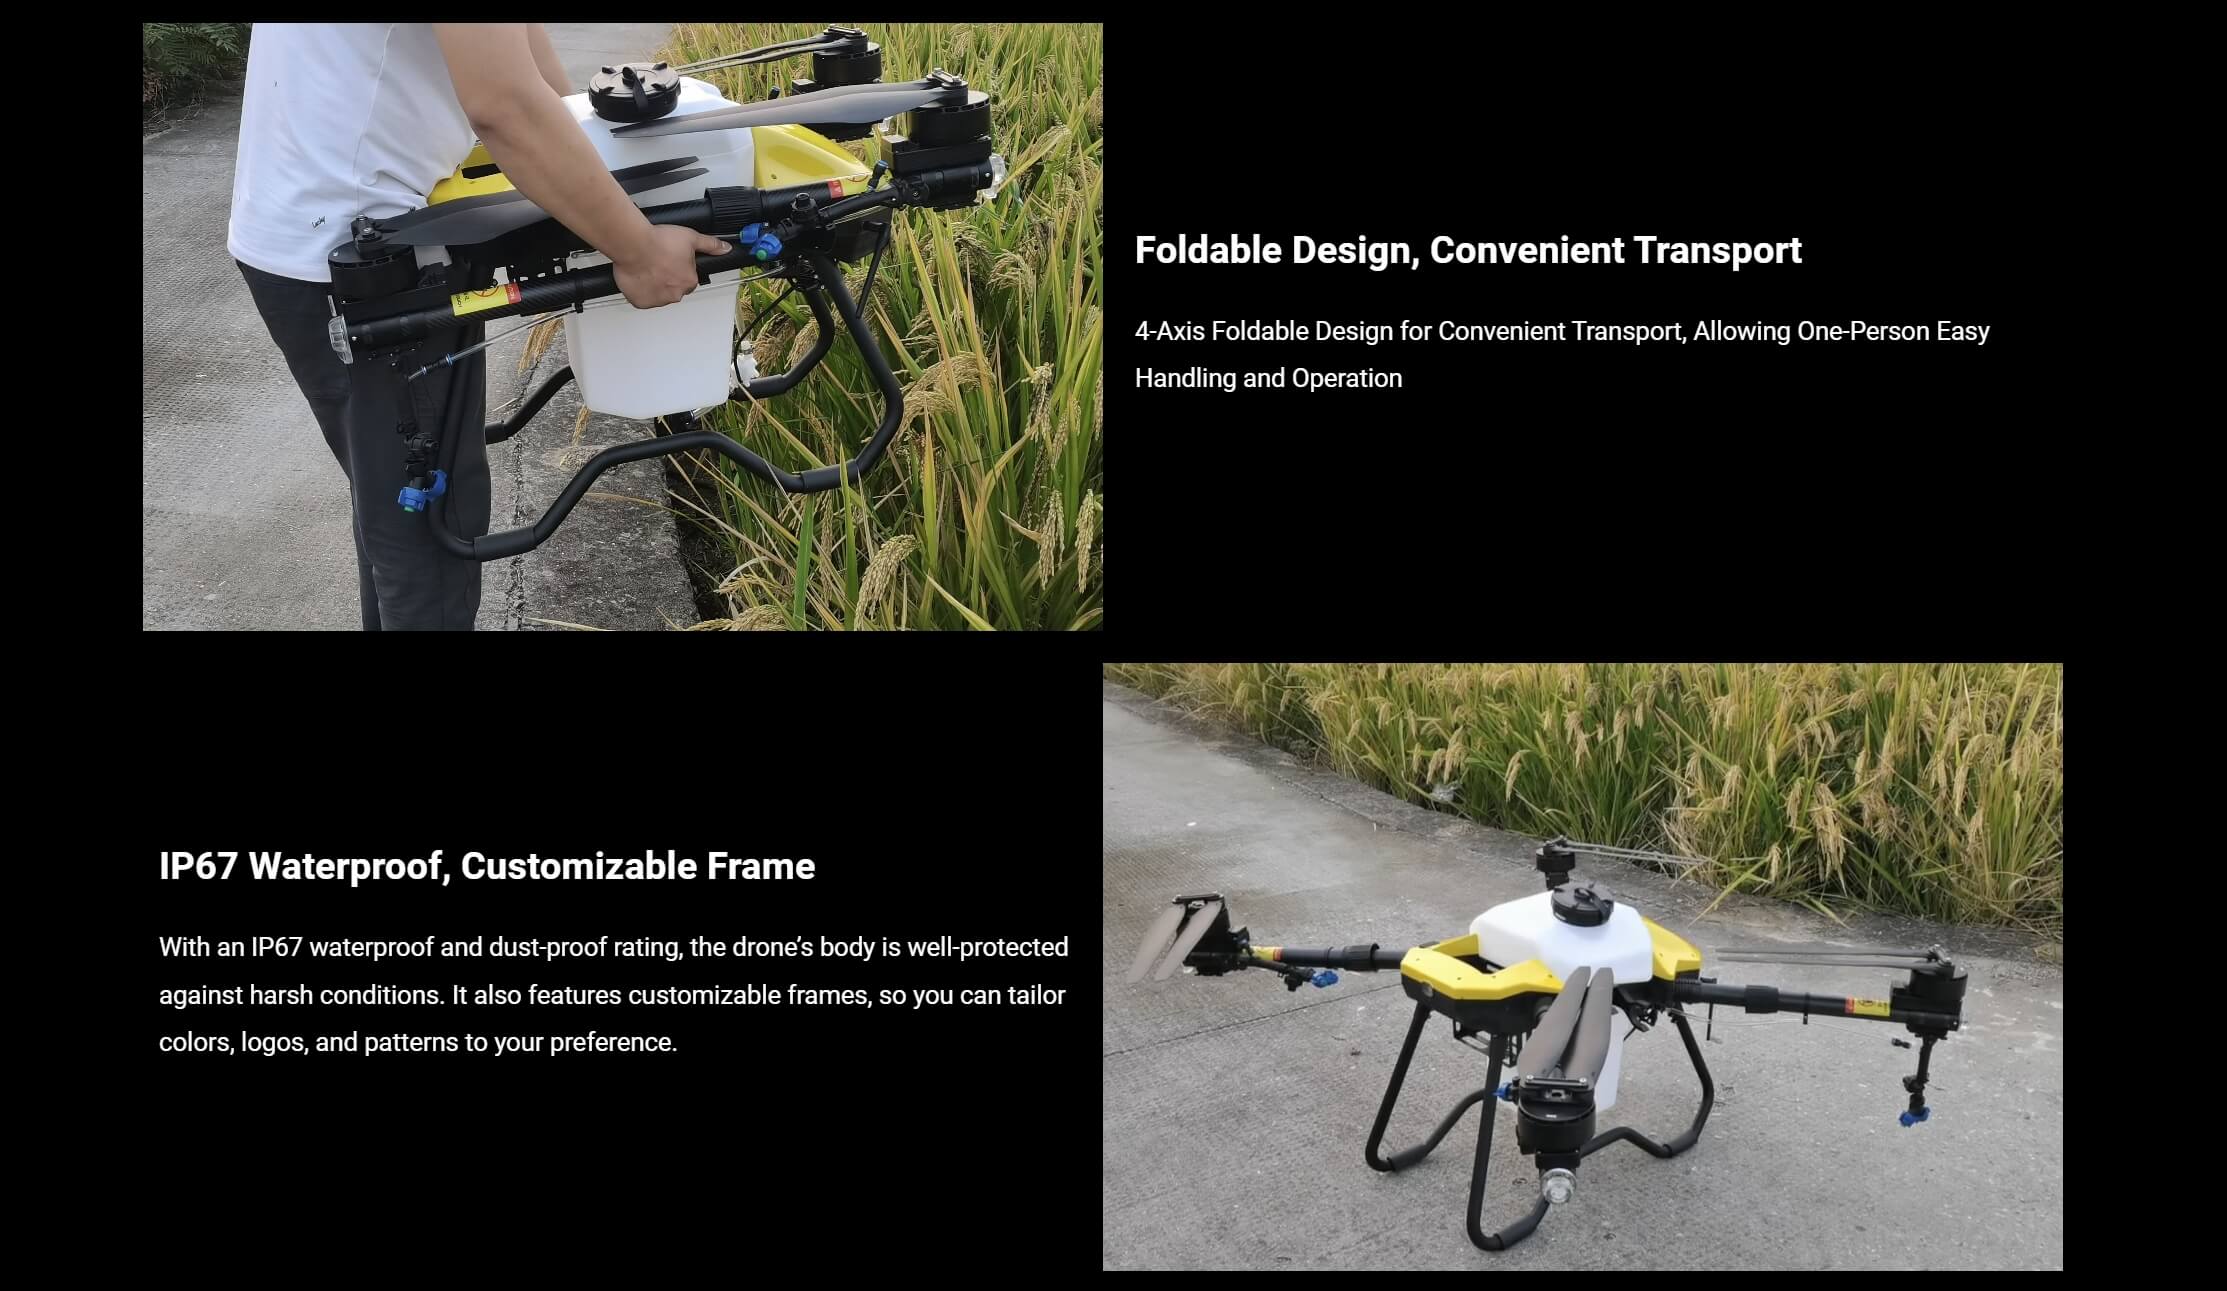 H32X Agriculture Drone, 4-Axis Foldable Design for Convenient Transport . IP67 waterproof and dust